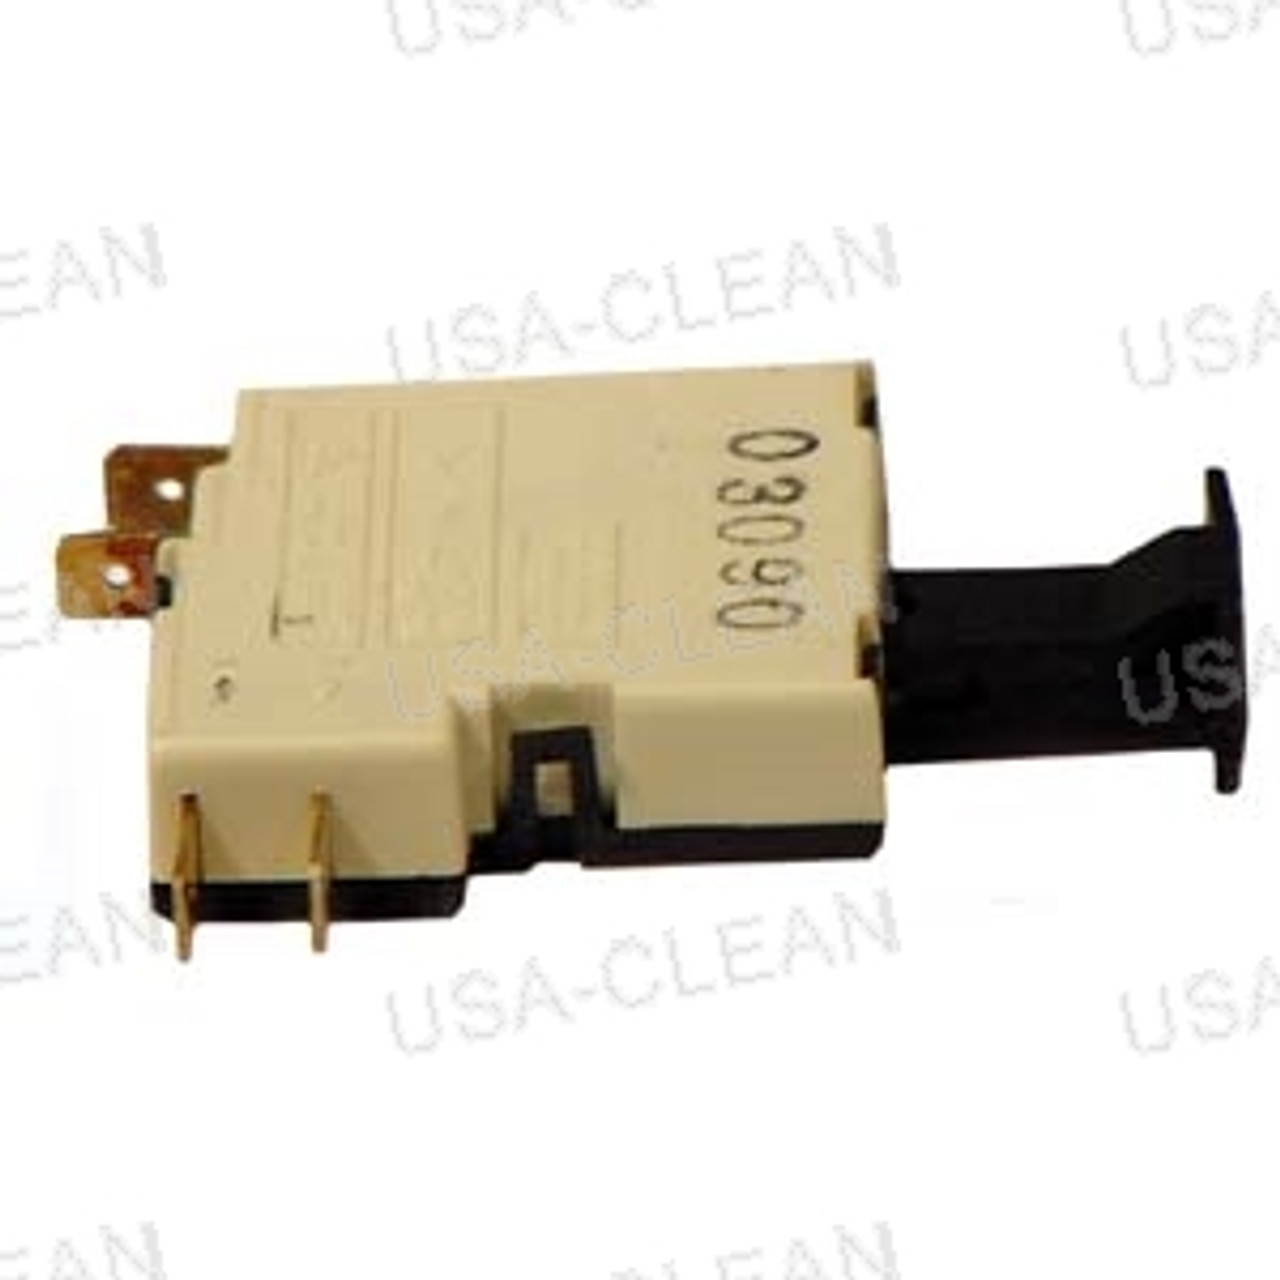 16amp protective motor switch 192-0587